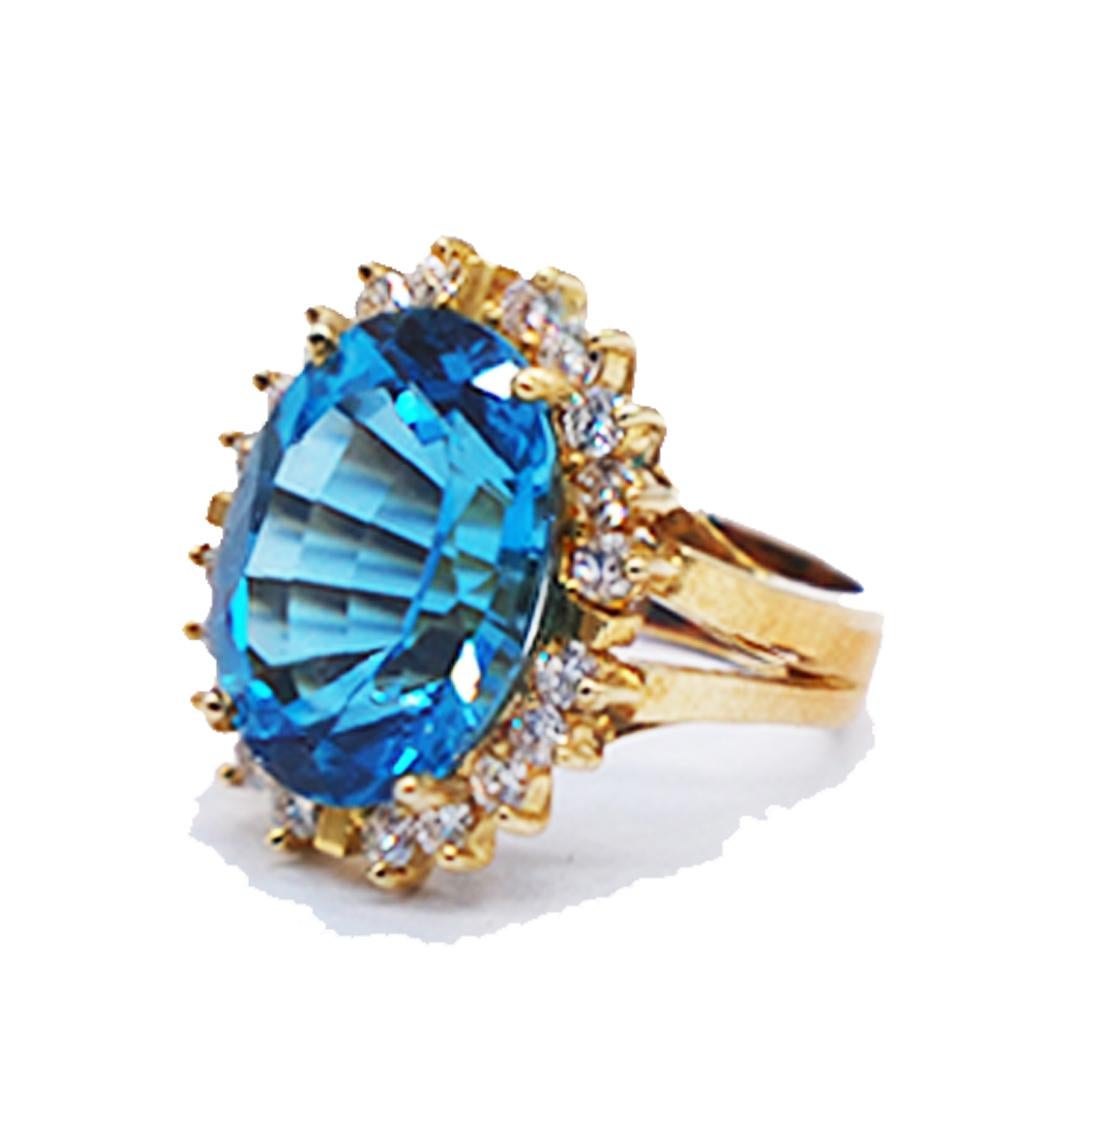 10 carat Blue Topaz, 1 carat Diamond Halo Ring set in 18 Karat Yellow Gold. 
The size of the ring is 21 x 18 mm wide.

The ring consists of an oval shaped dynamic colored Blue Topaz with beautiful sparkling faceting at sparkles 
Blue Topaz
15.76 x